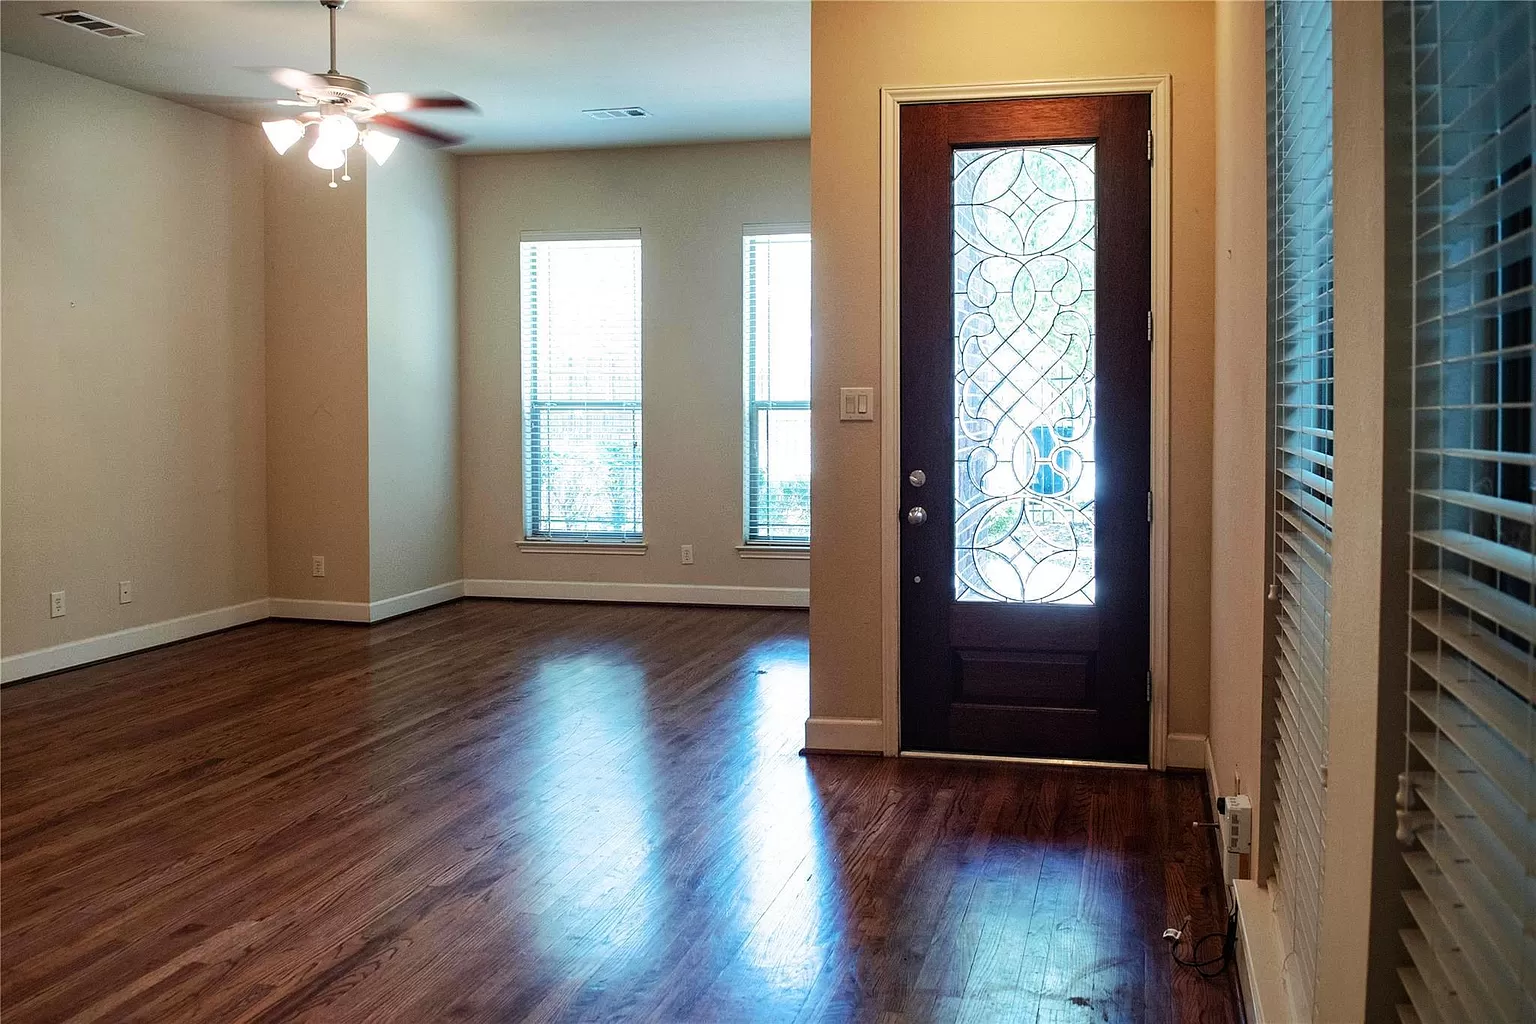 Spacious Town House - Centrally Located in Maple Avenue District